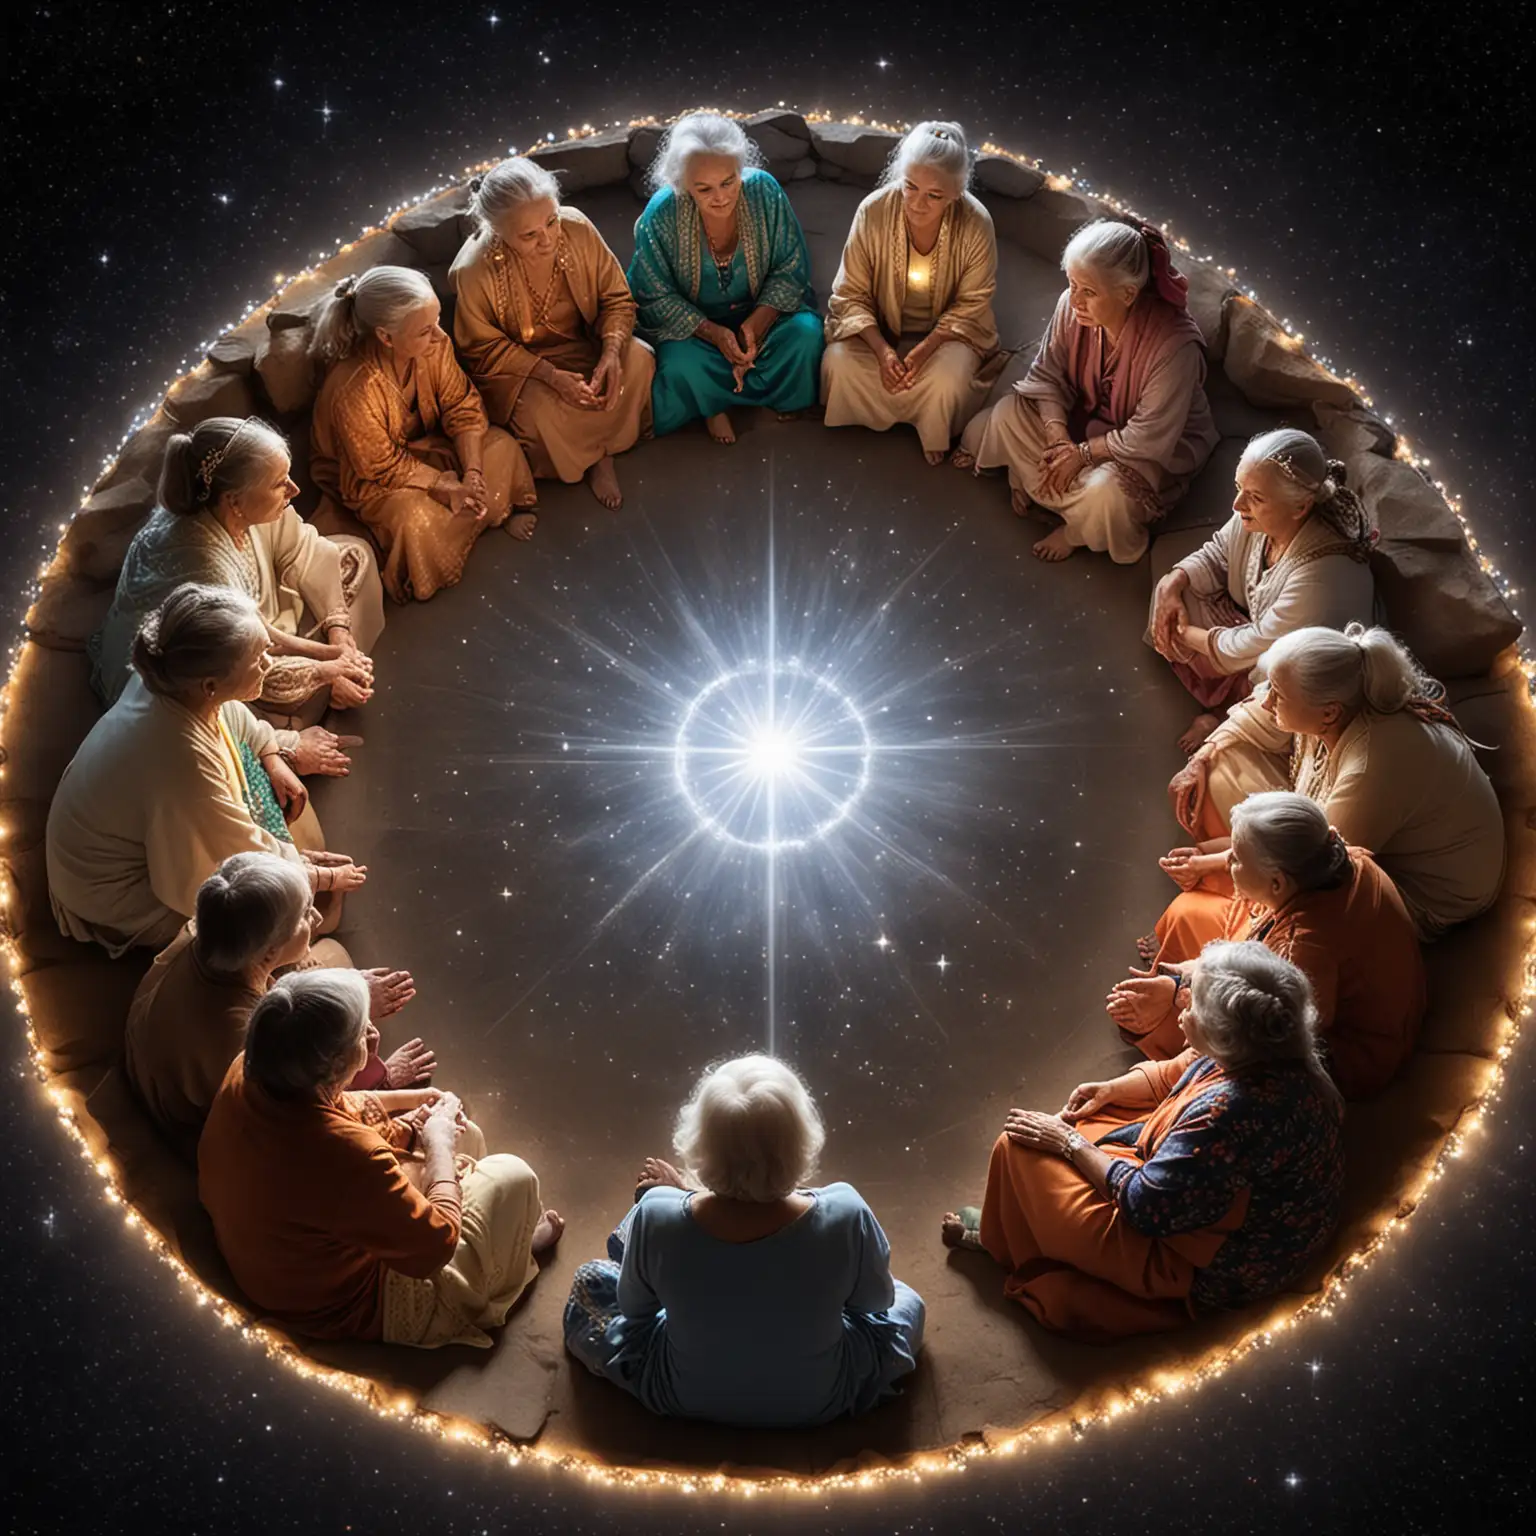 Council of Earth and Star Grandmothers Surrounded by Celestial Lights